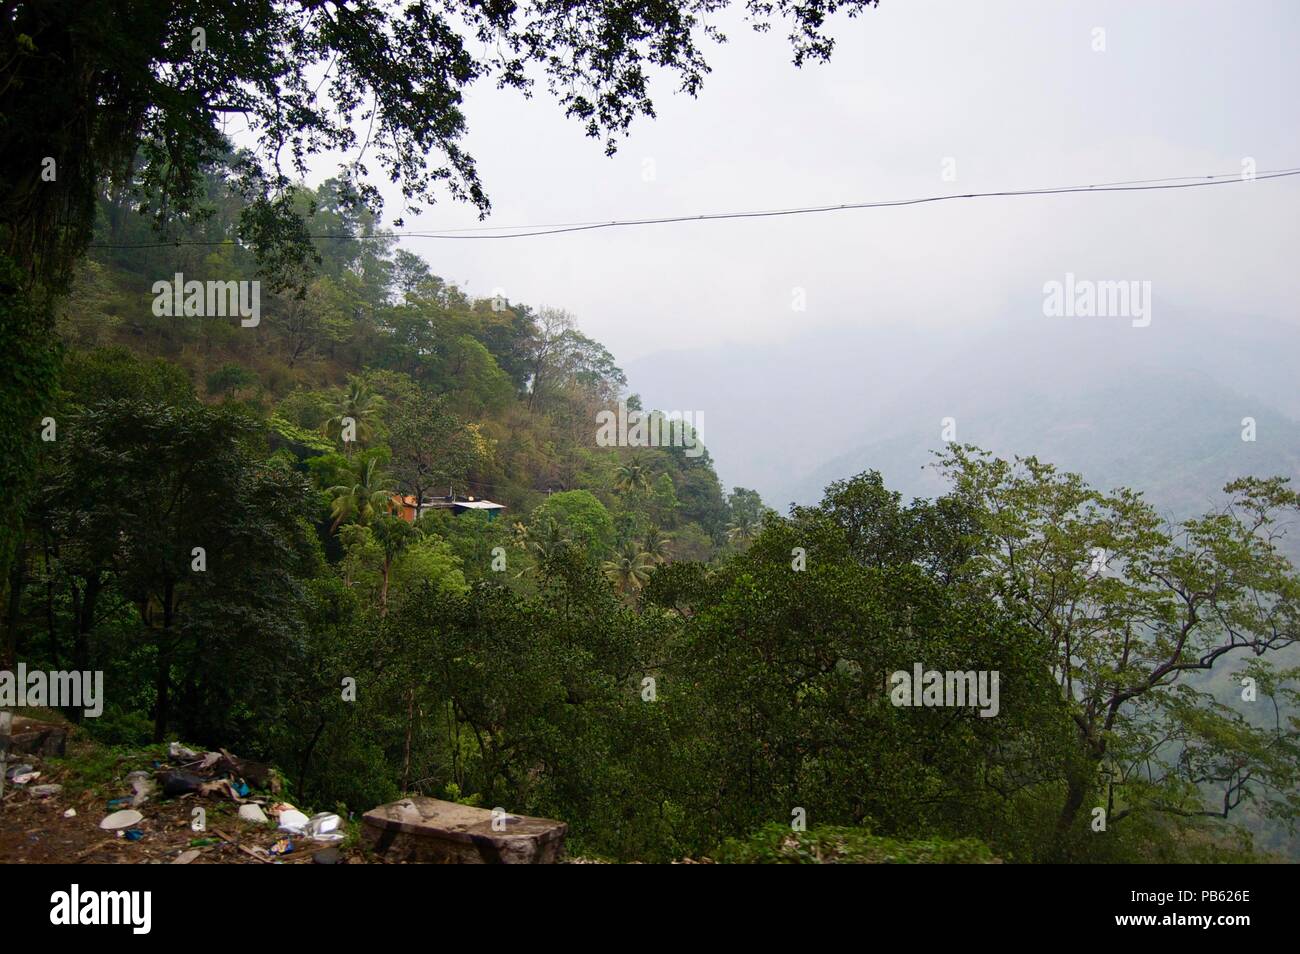 Magnificent valley view in Kerala (rural India): Landscape with idyllic unspoilt nature, trees forming a lush green jungle and a foggy sky Stock Photo